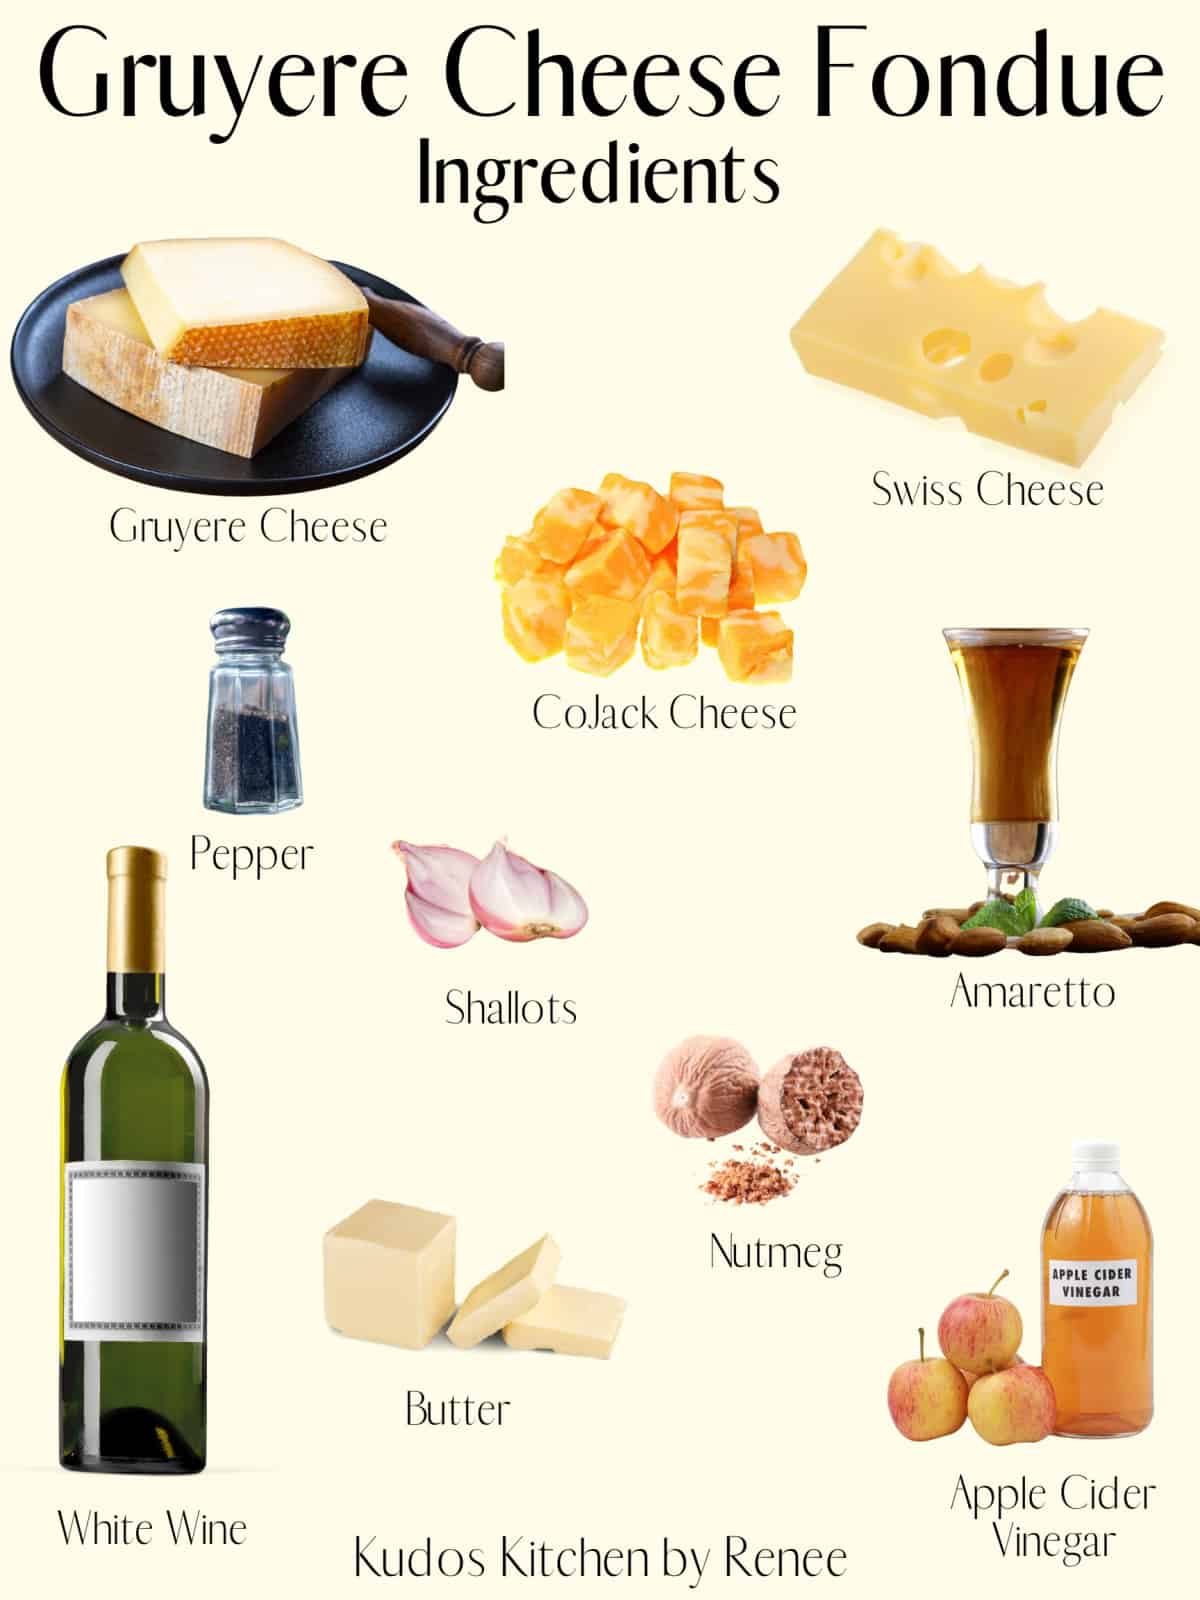 Ingredient list with images for making Gruyere Cheese Fondue.